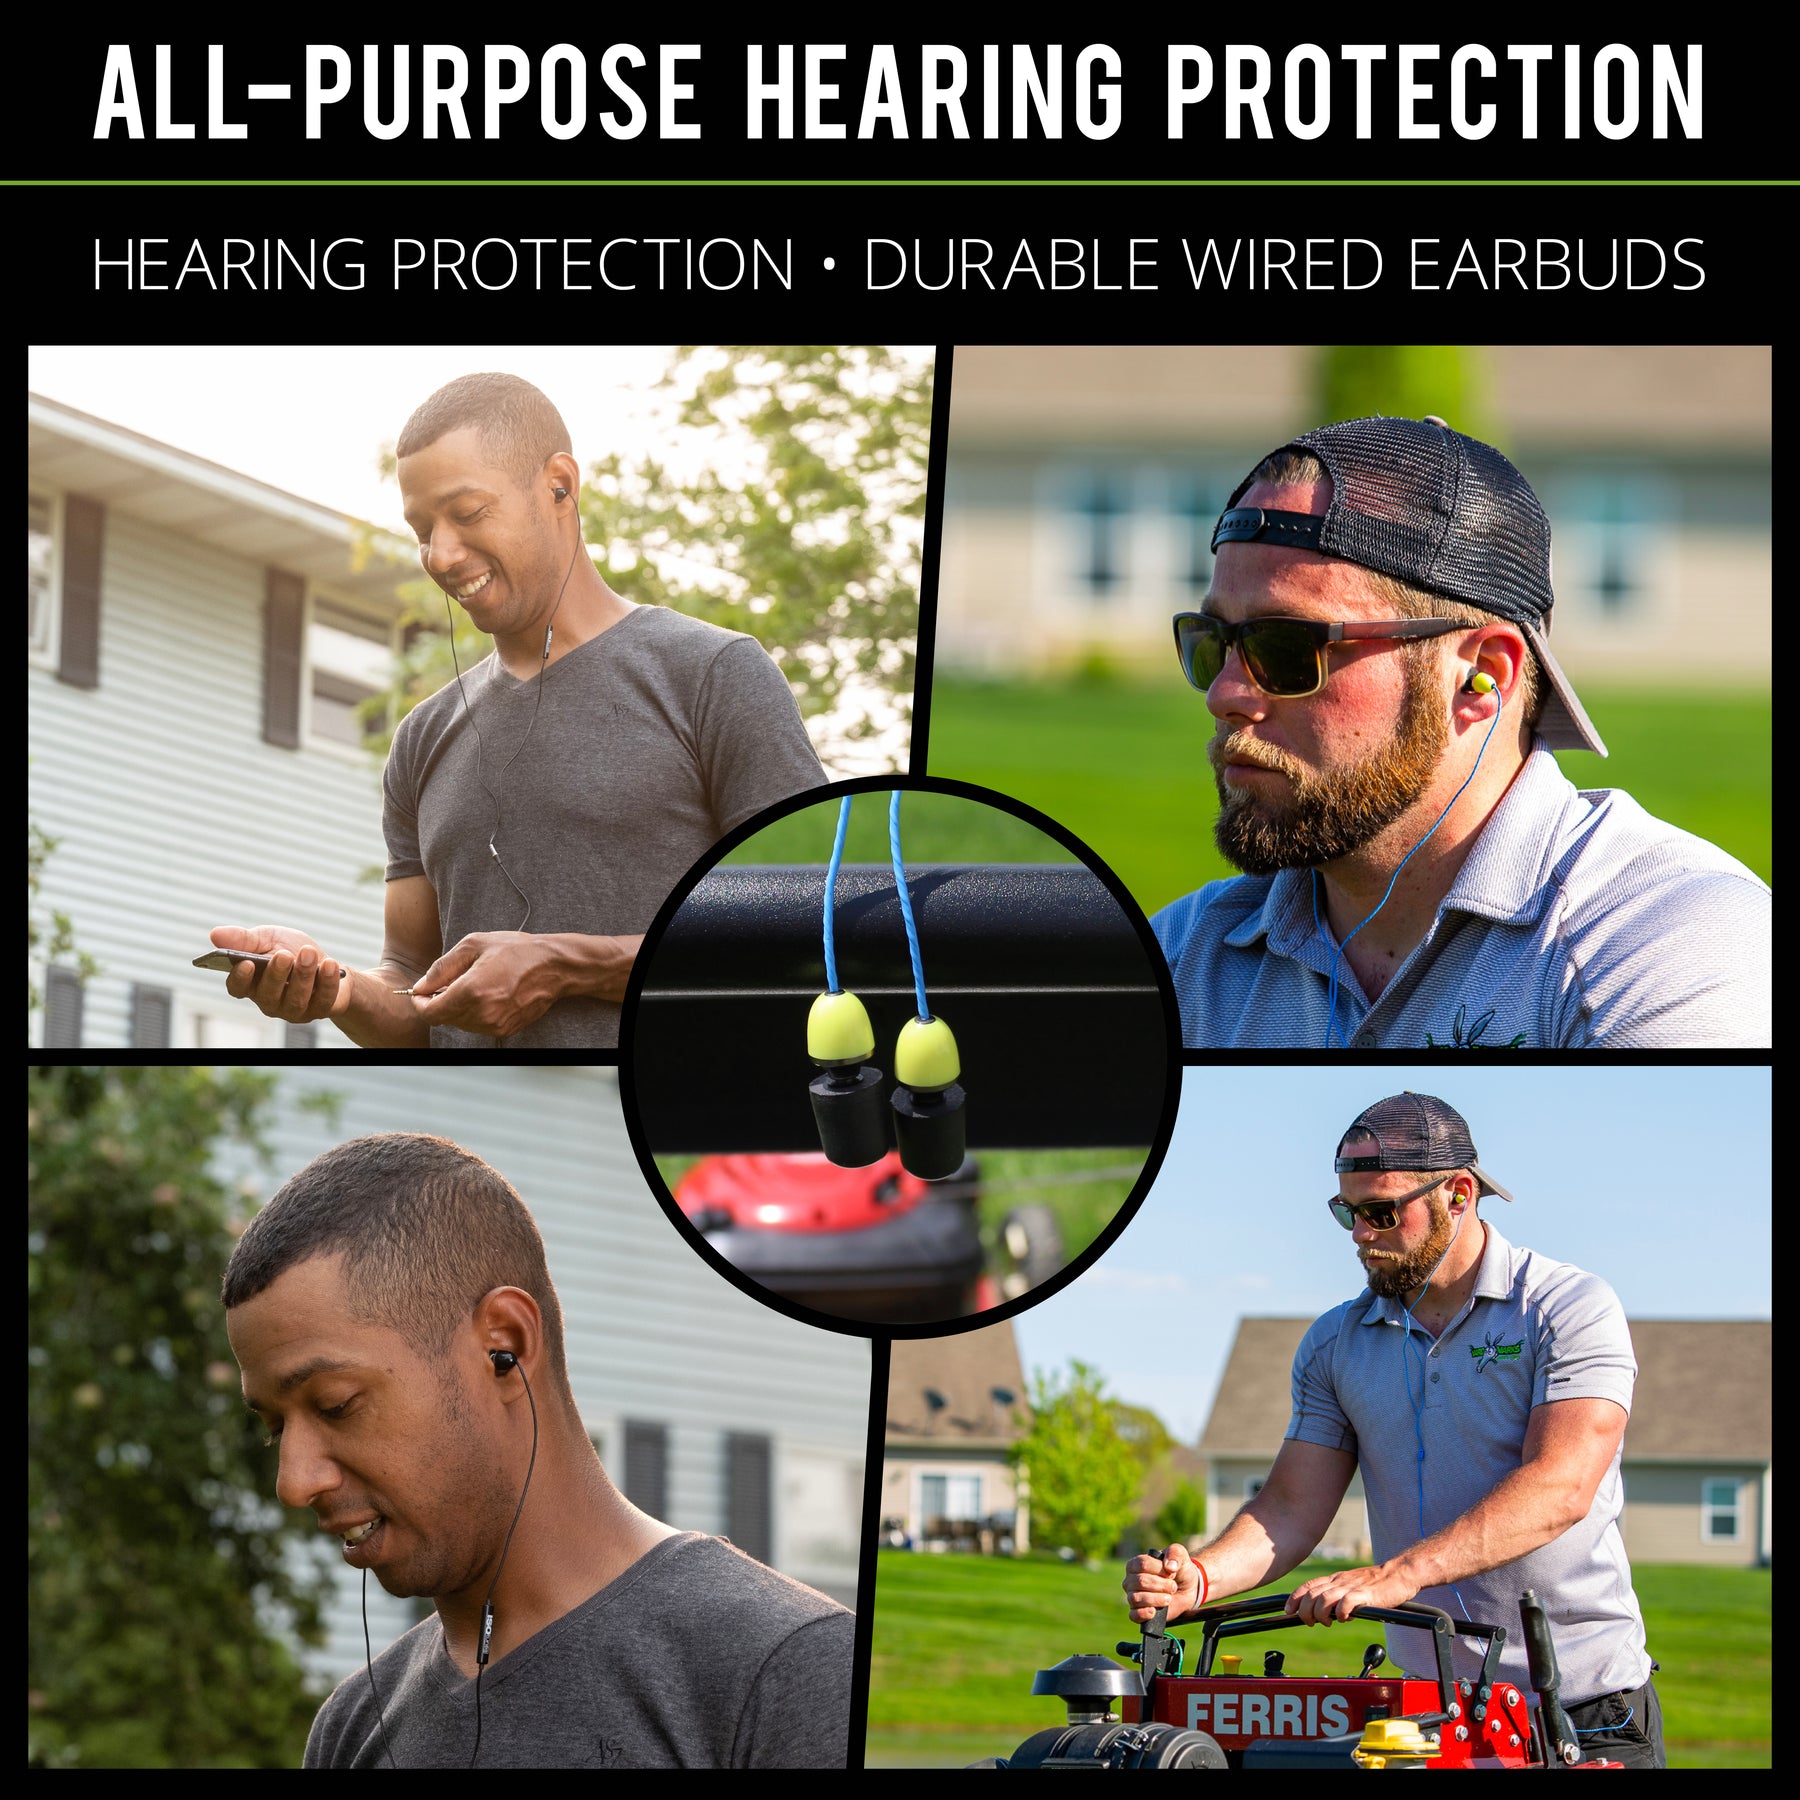 ISOtunes WIRED Listen Only All-Purpose Hearing Protection Durable Earbuds